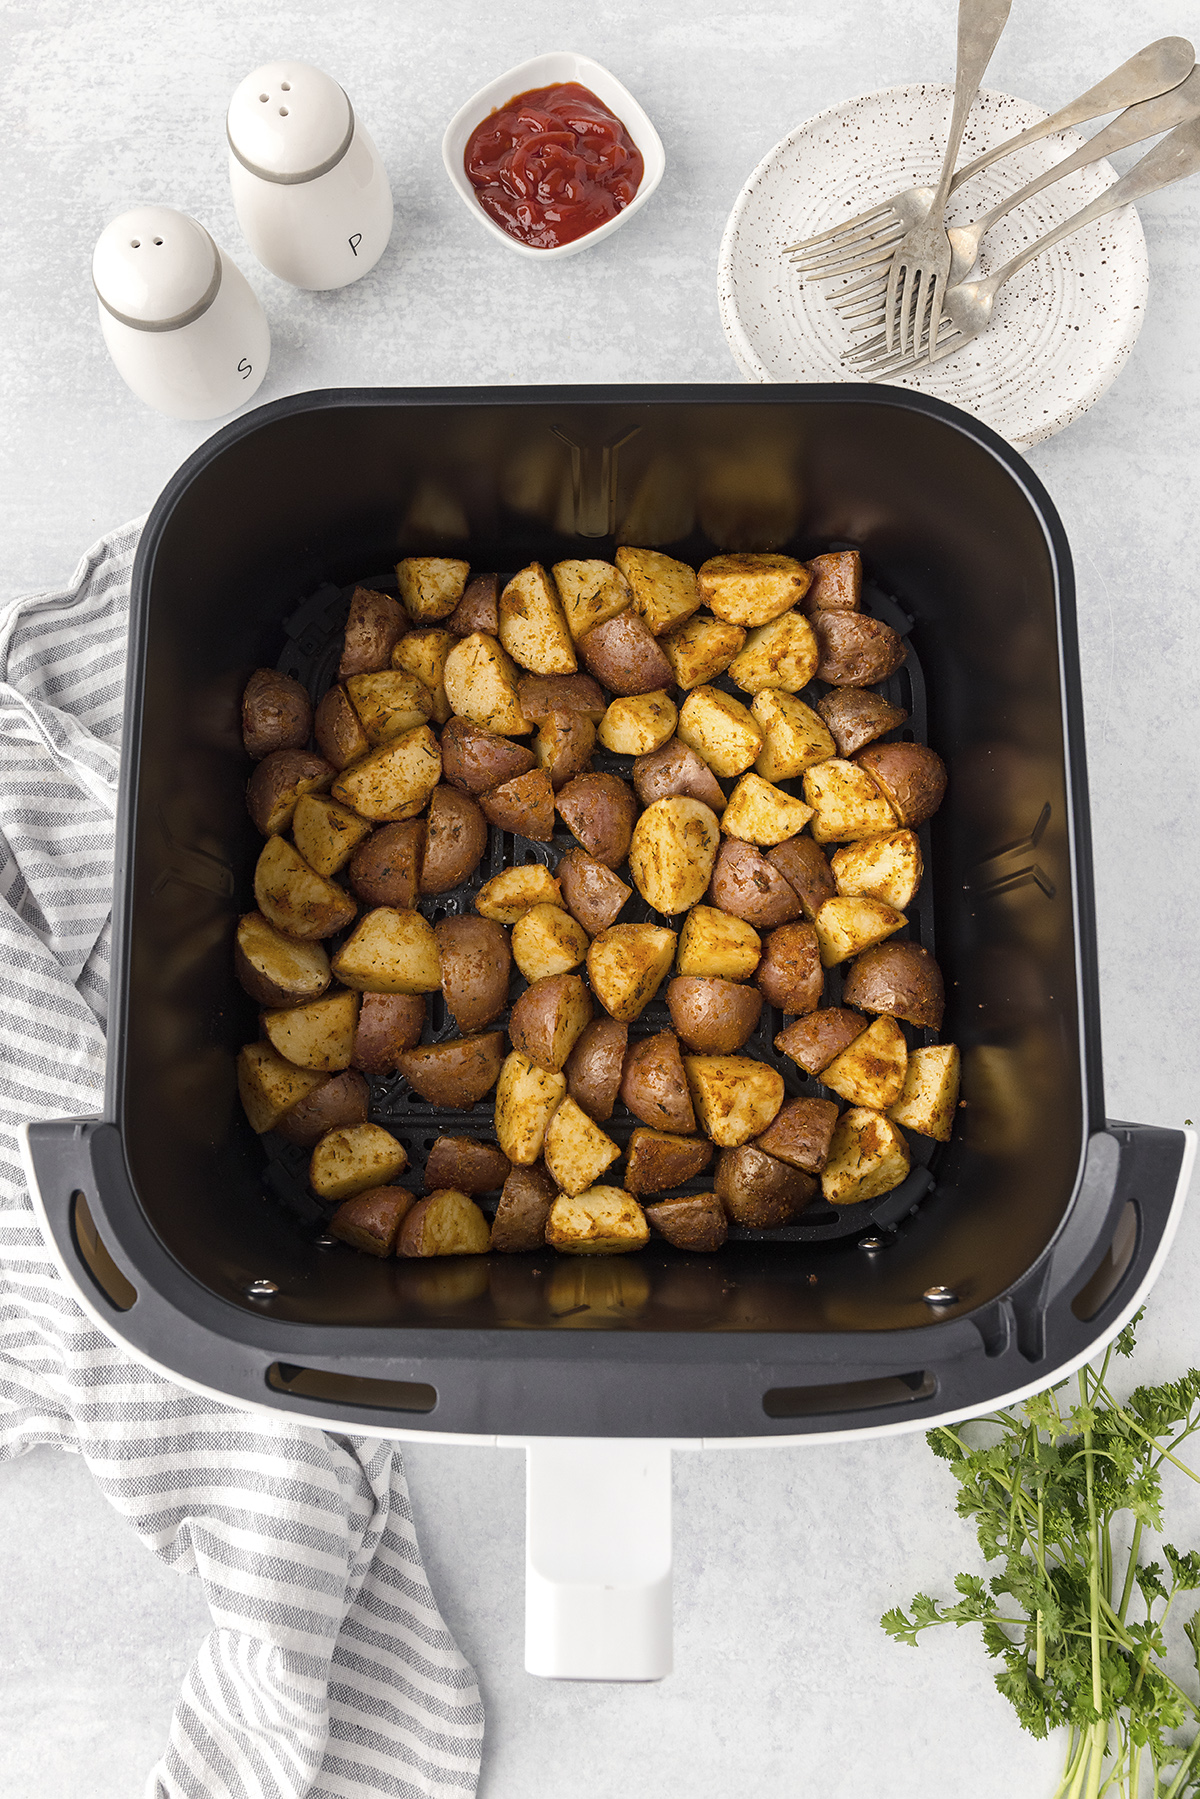 Cooked roasted red potatoes in an air fryer basket.